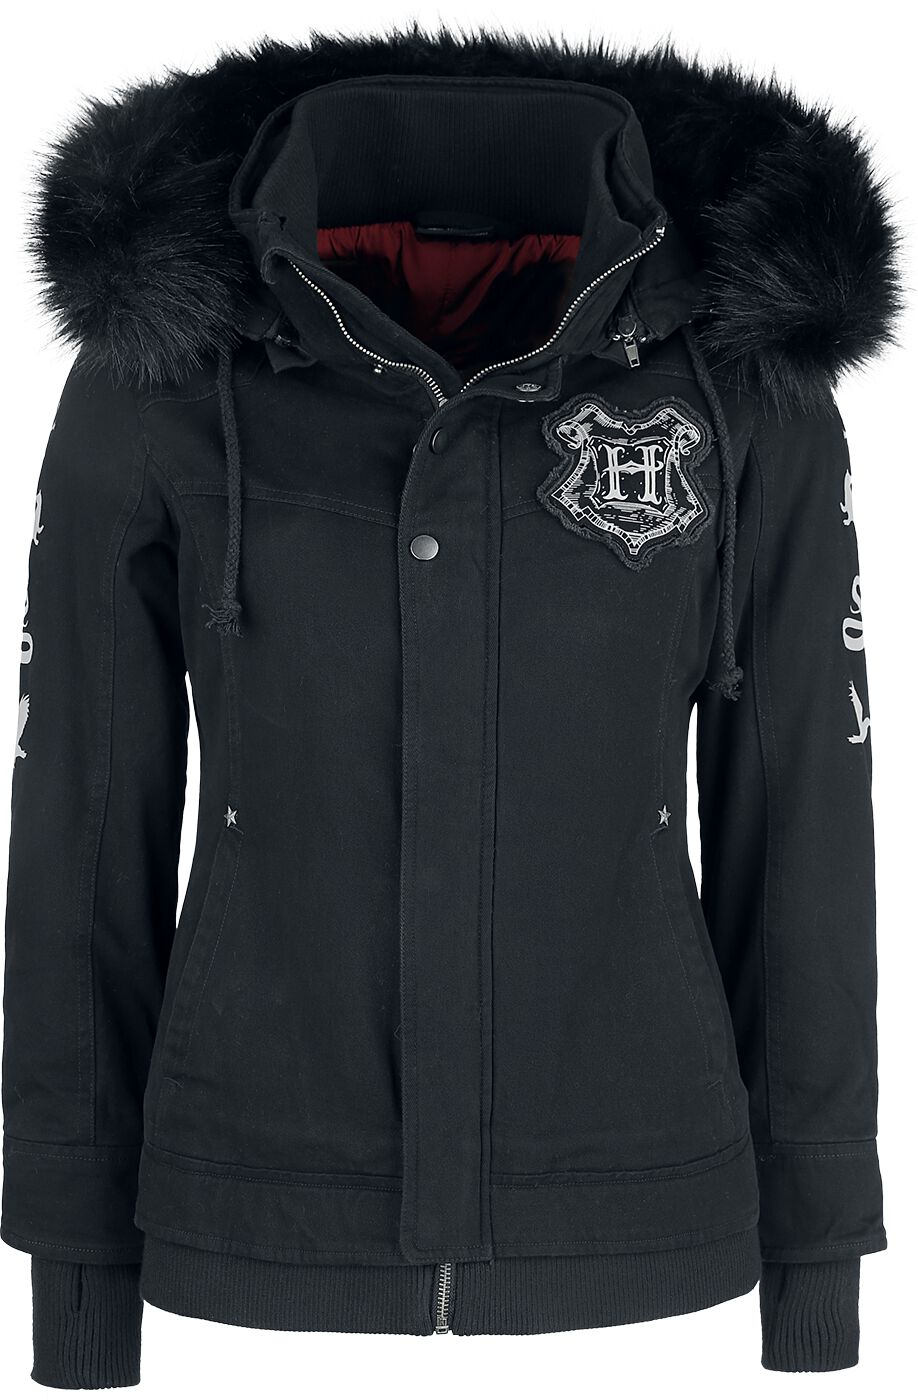 Image of Giacca invernale di Harry Potter - Hogwarts Crest - XS a XXL - Donna - nero